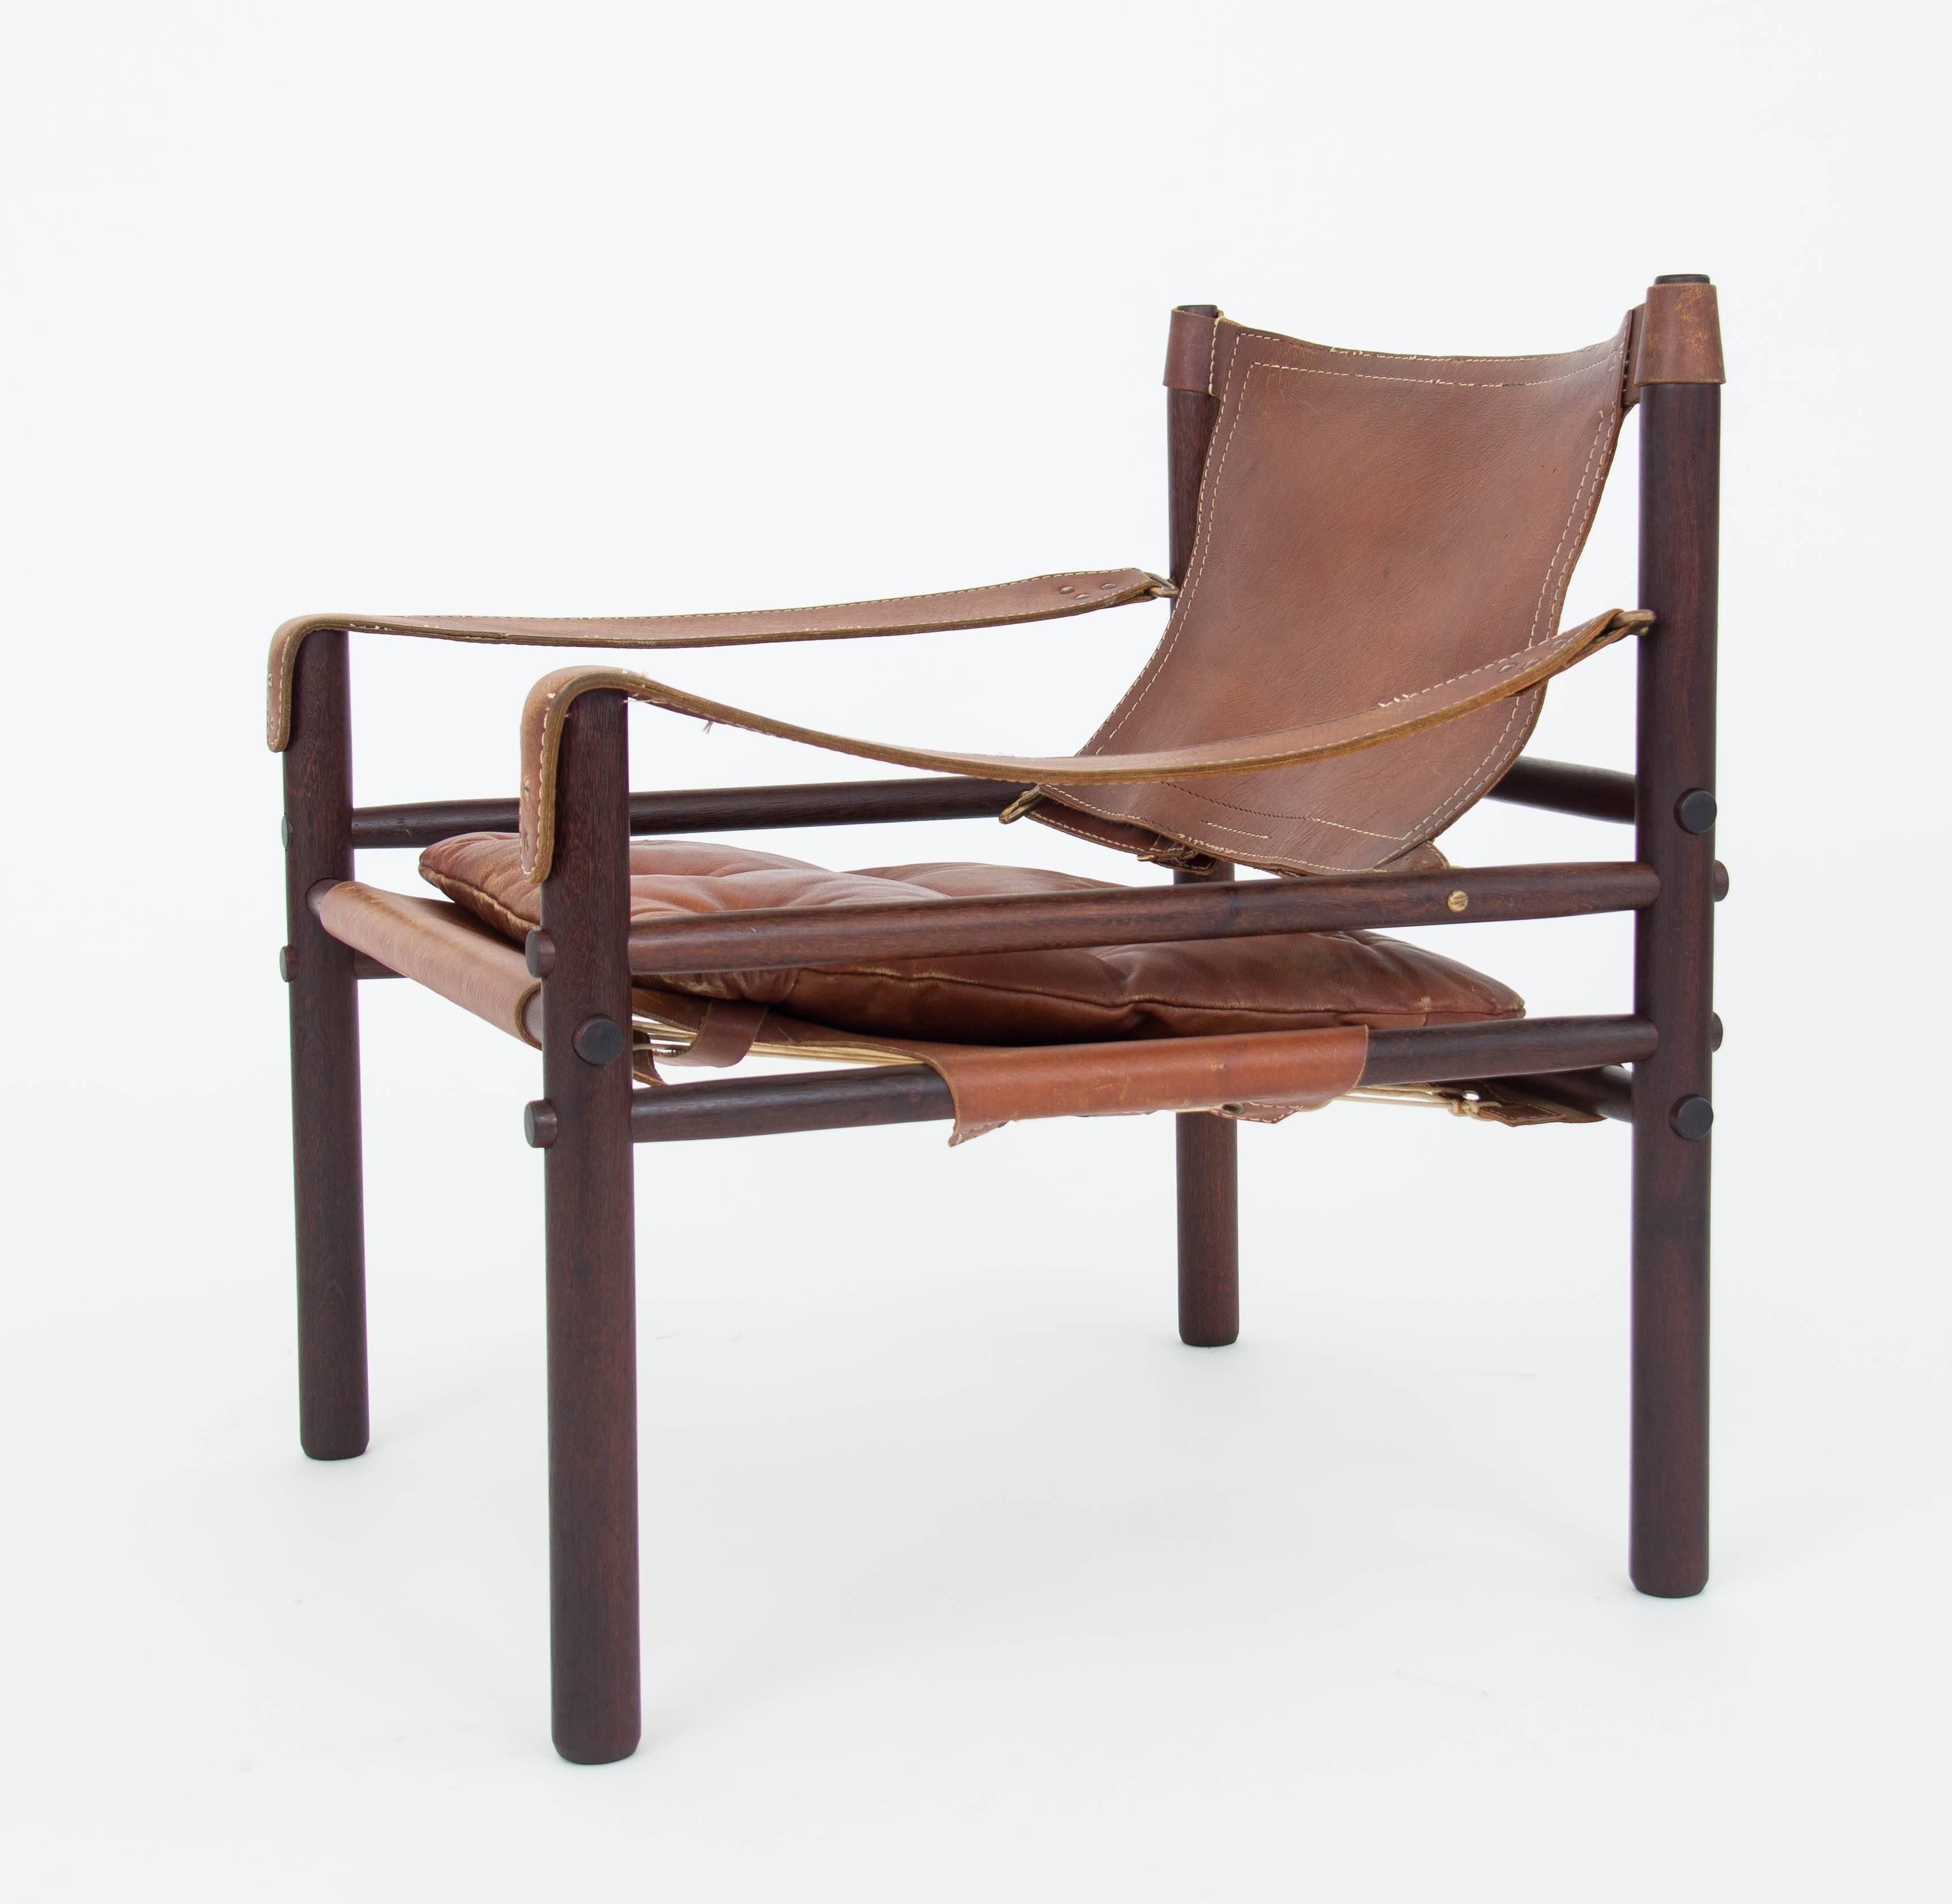 An example in chocolate brown leather of the 'Sirocco' safari chair designed by Arne Norell for his eponymous company, Norell Möbel AB of Småland, Sweden. The chair features a solid rosewood frame strapped together by leather slings with brass